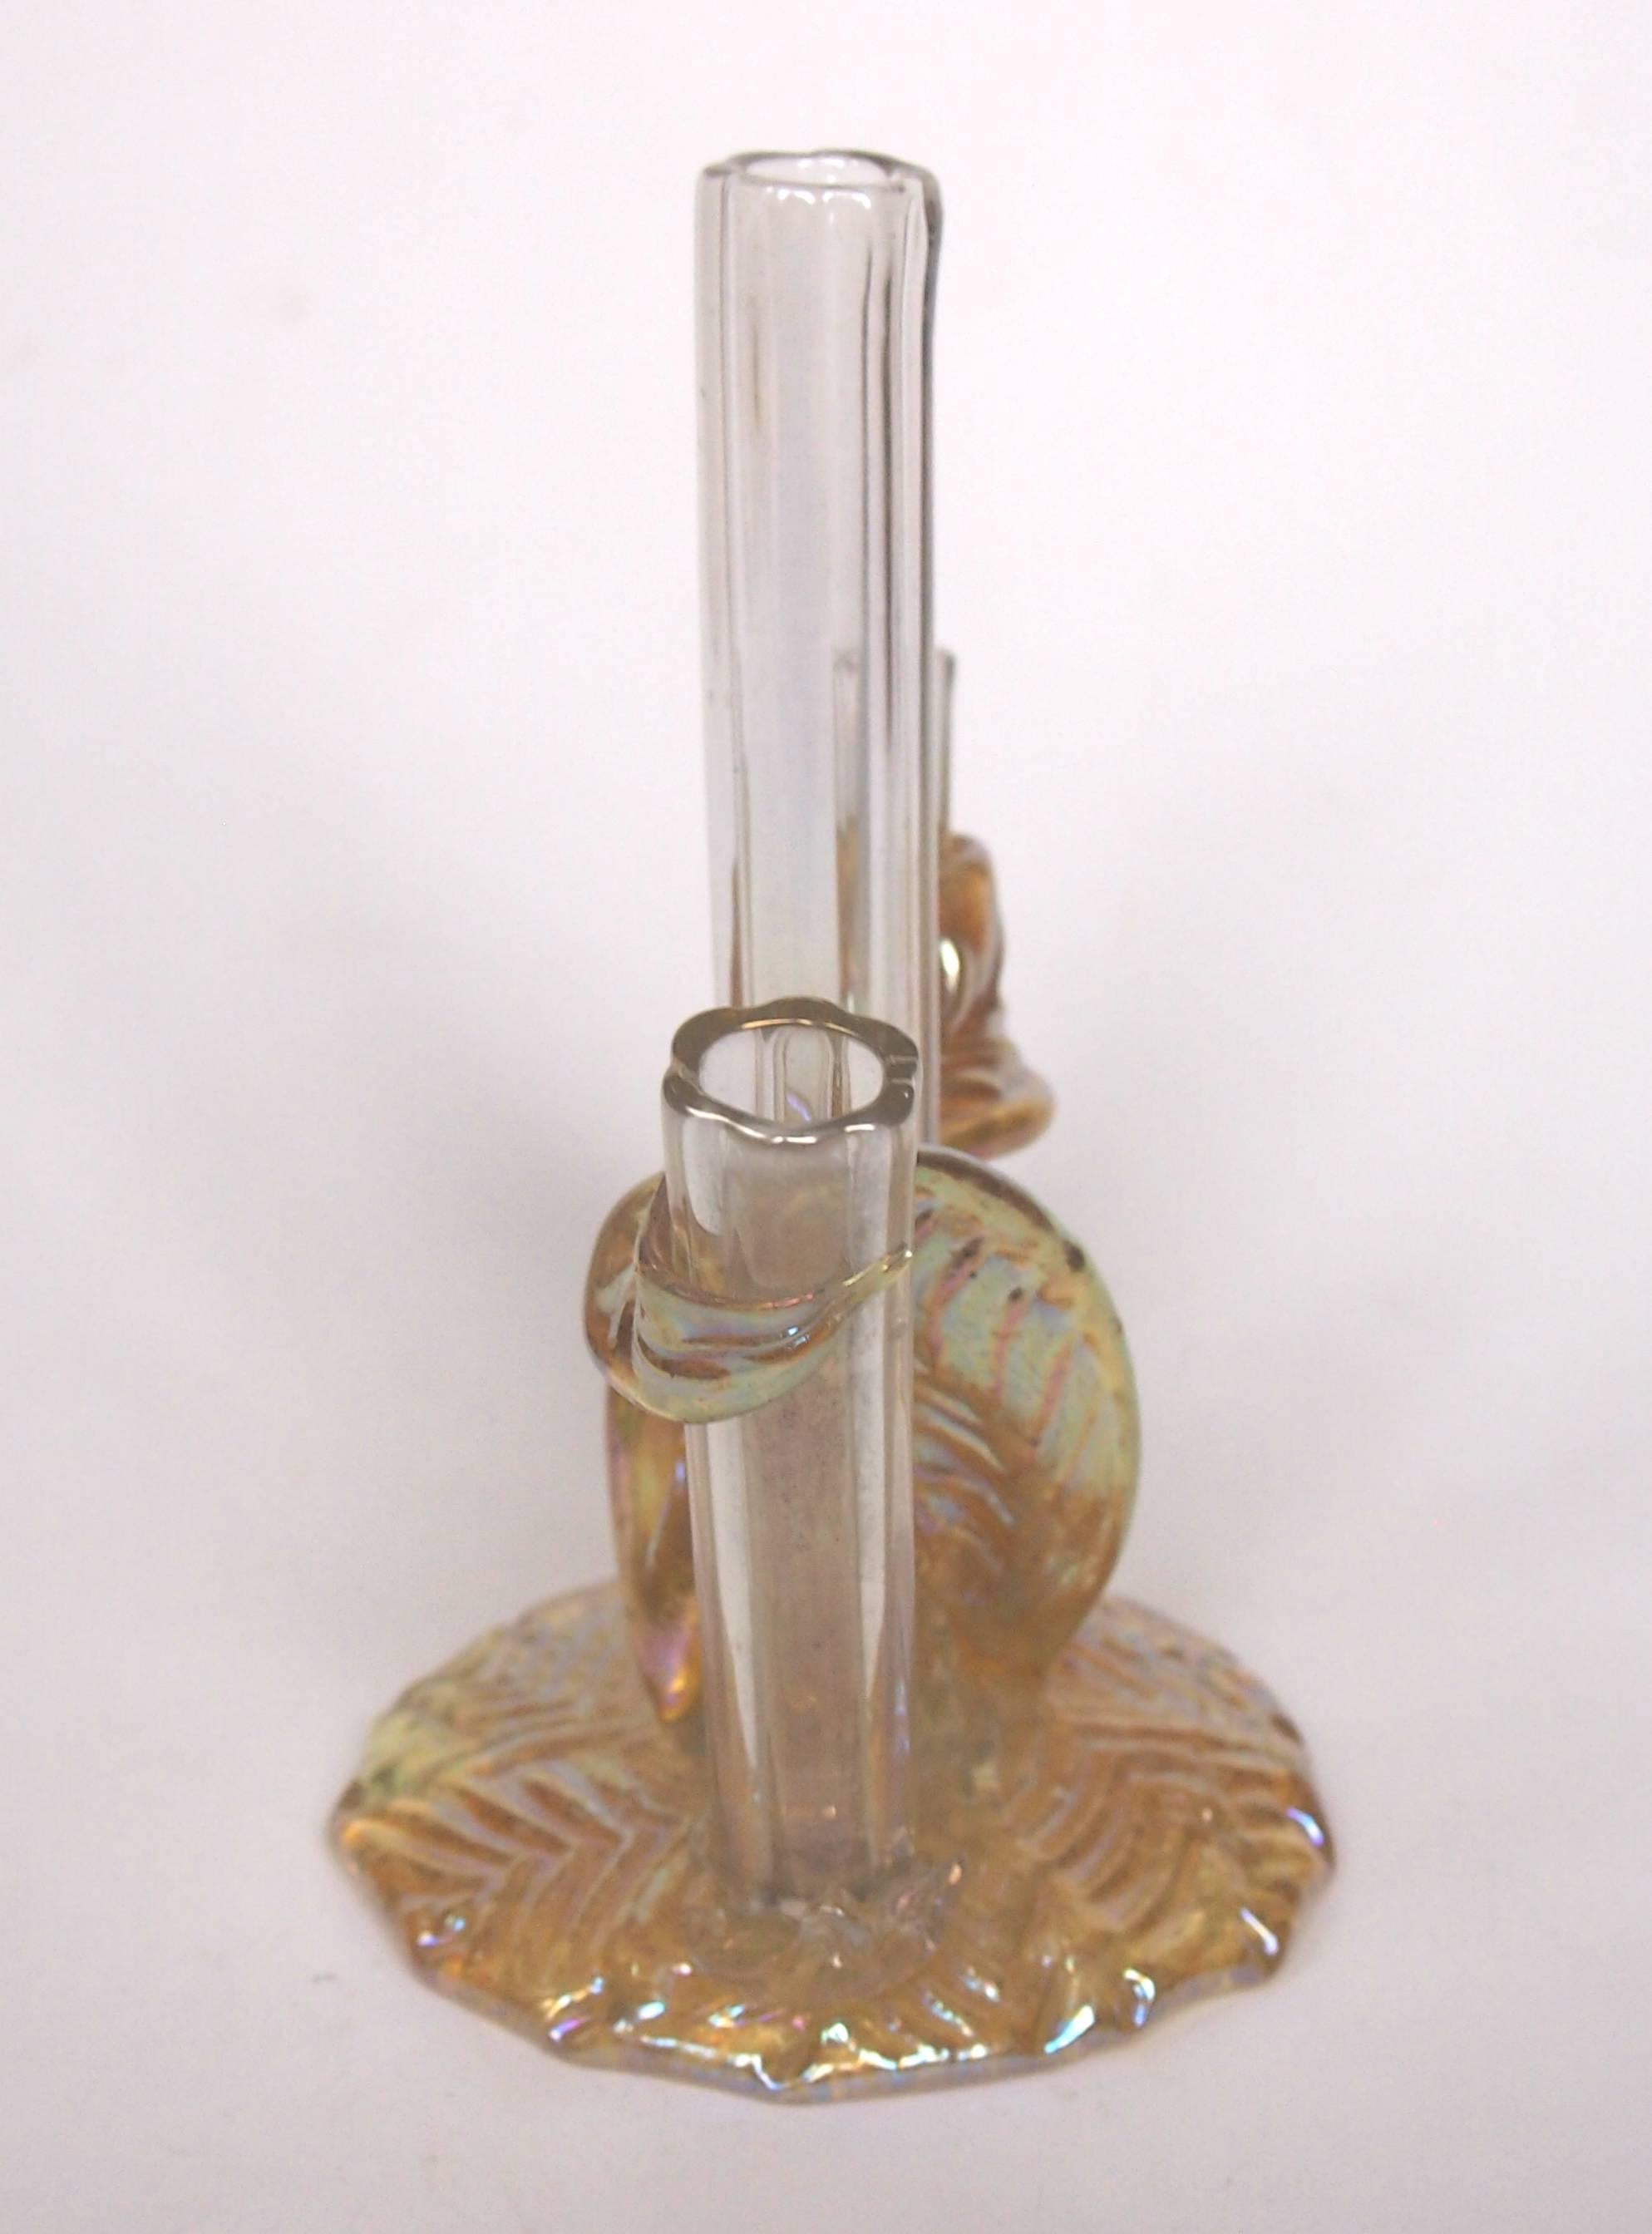 Bohemian Art Nouveau Loetz Glass Stick Vase Made for Max Emanuel in 1910 In Good Condition For Sale In London, GB